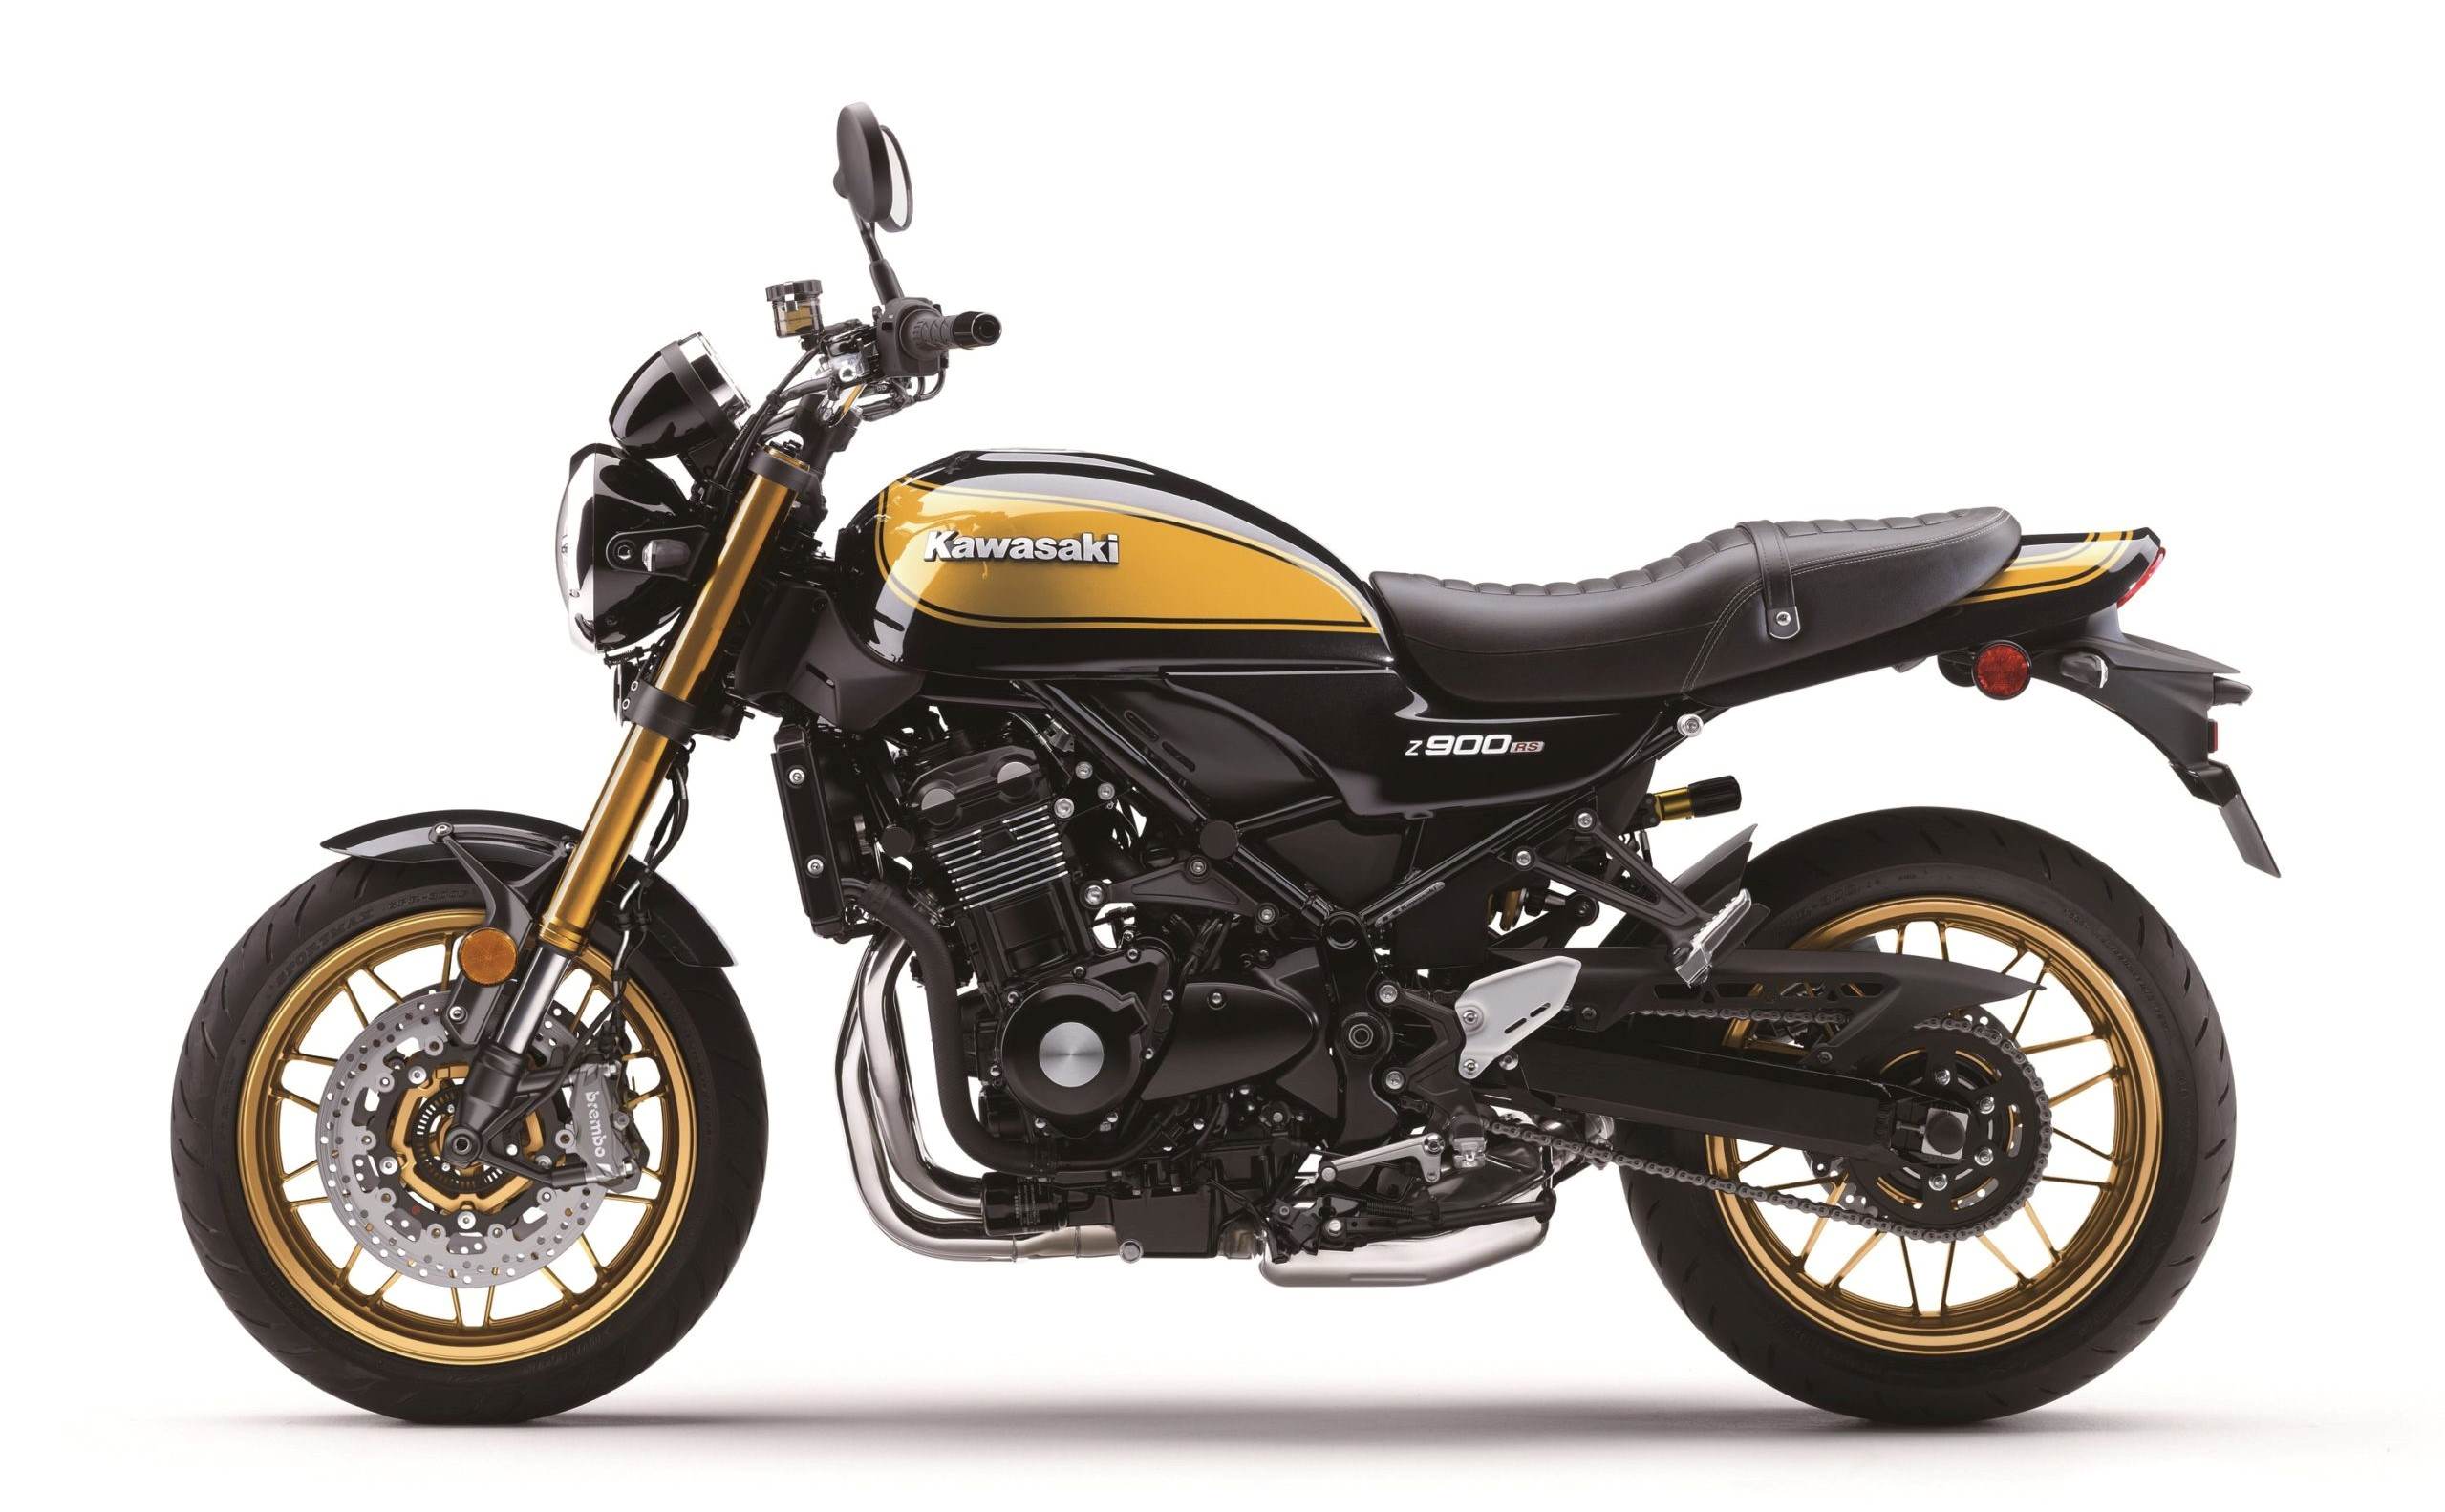 18-extraordinary-facts-about-kawasaki-z900rs-se